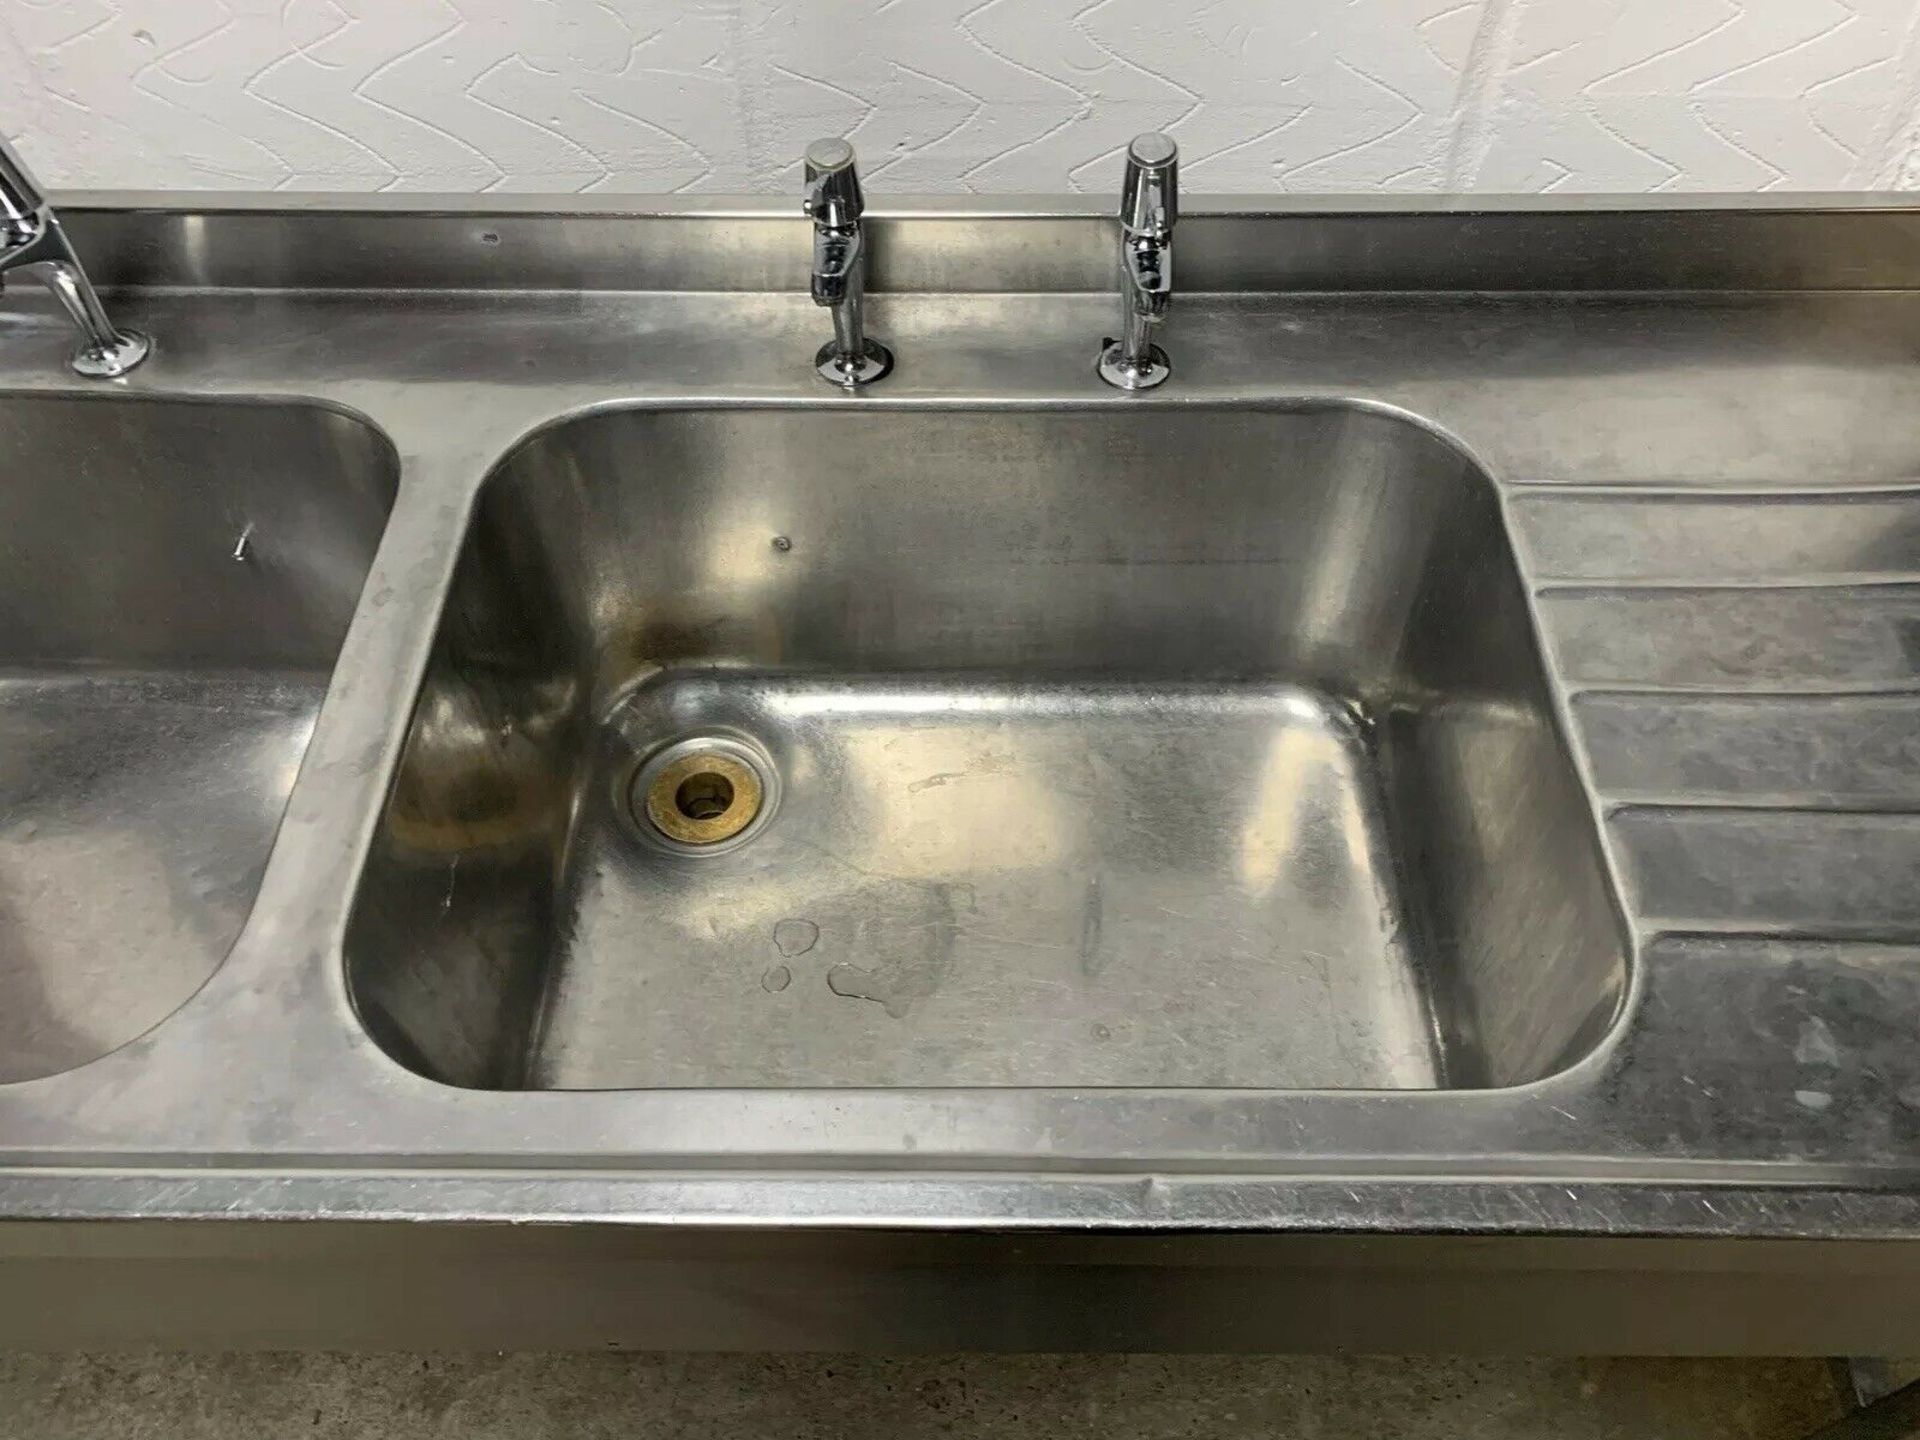 Stainless Steel Double Bowl Sink With Righthand Drainer, Taps and Upstand - Image 4 of 6